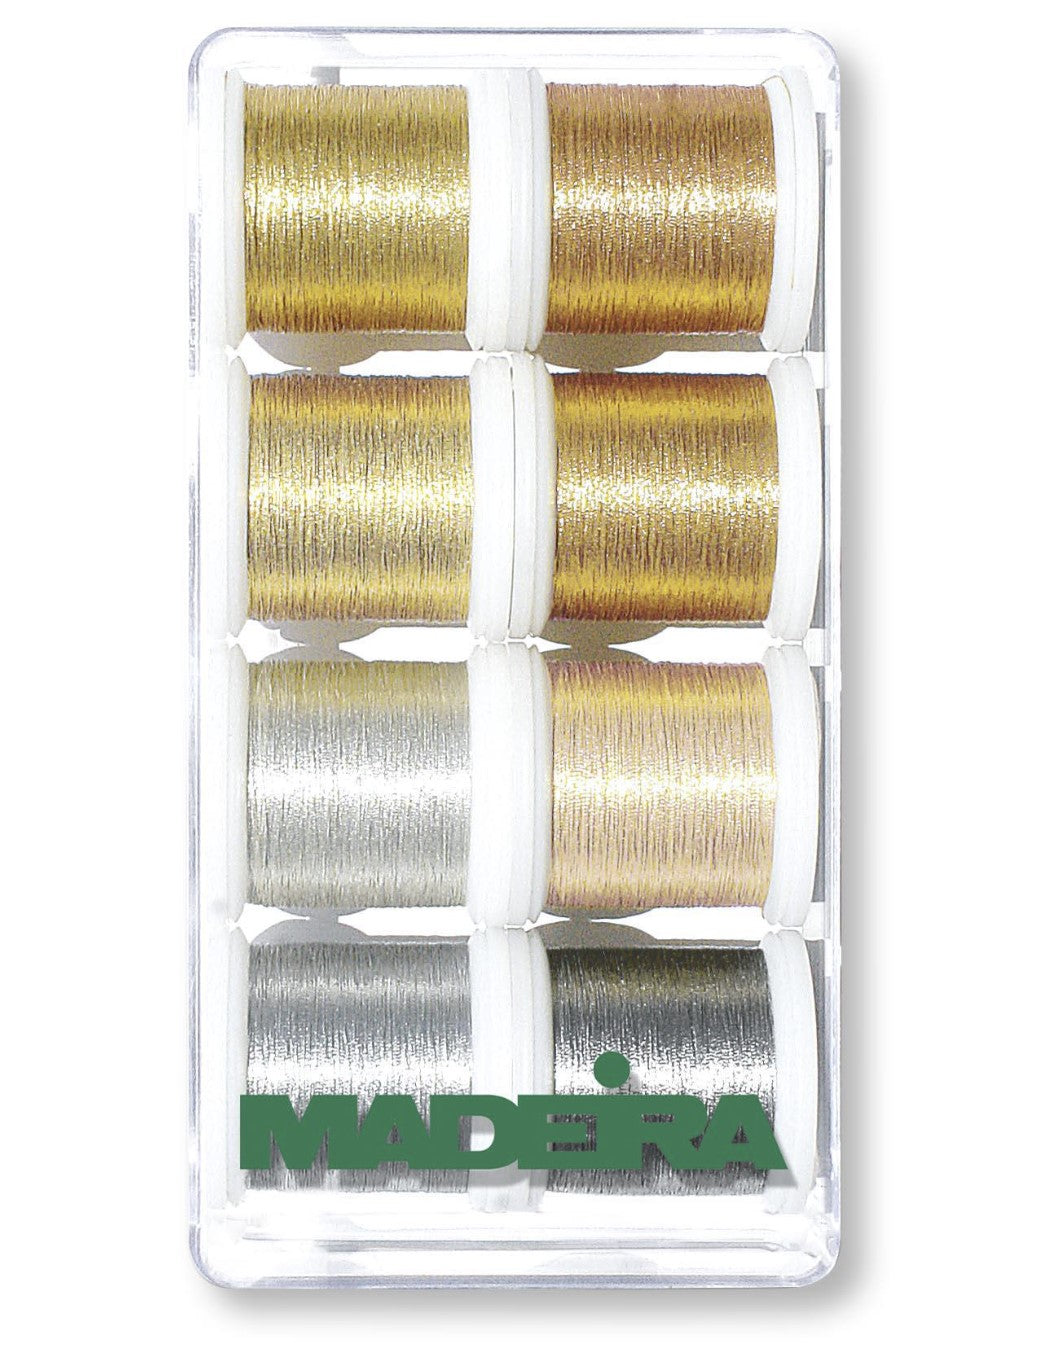 Assortment Metallic Smooth  -- Machine Embroidery Threads -- Gift Box, 8 units (#40 Weight, Ref. MA8019) by MADEIRA®